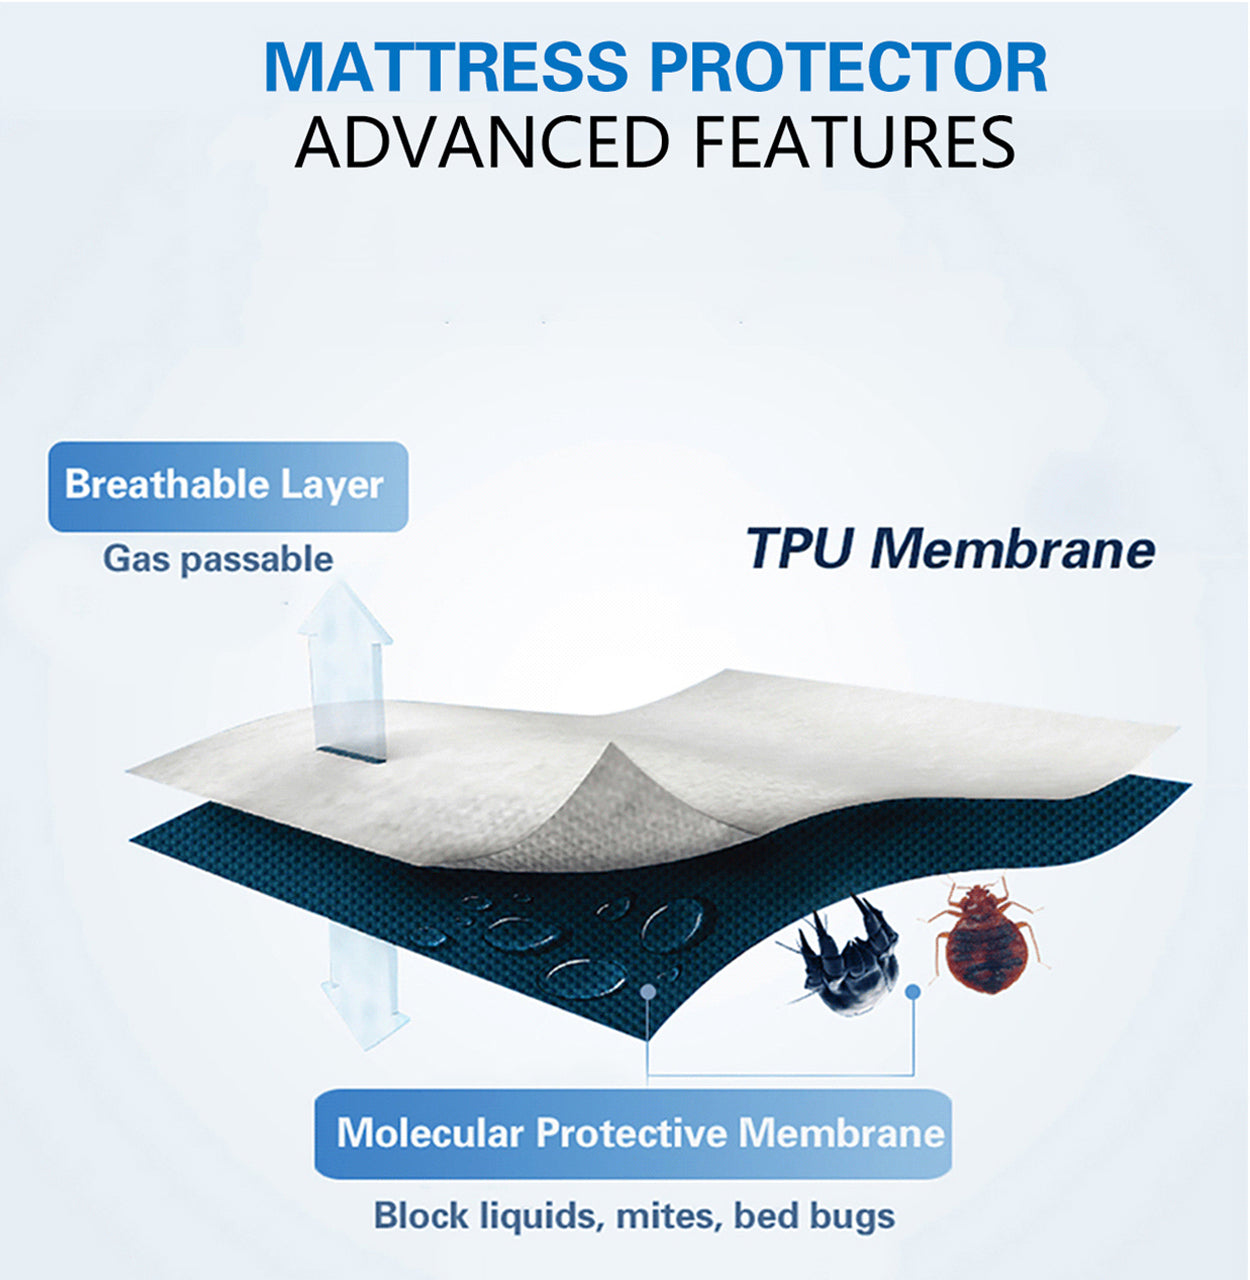 Bedecor Cotton Terry waterproof mattress protector—Waterproof and breathable schematic